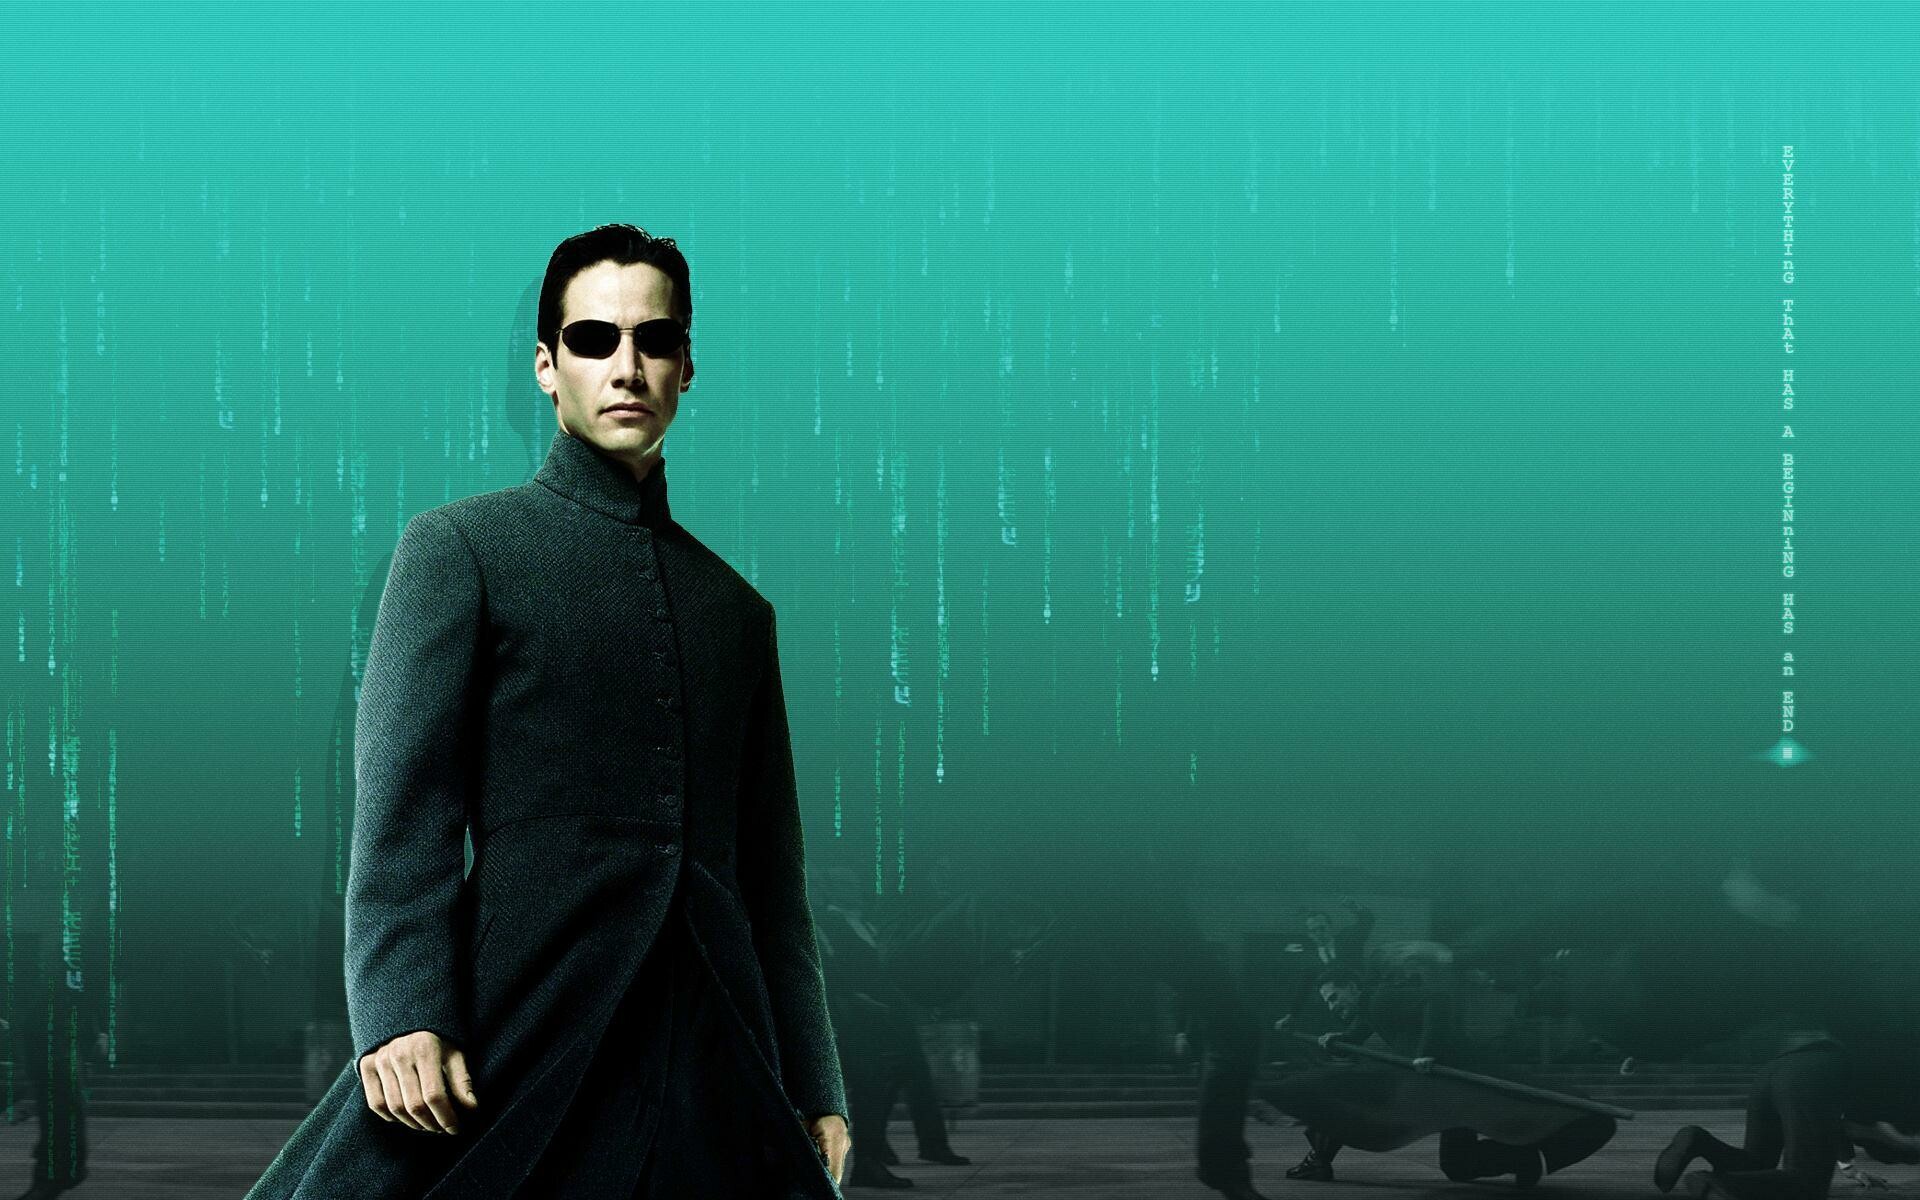 Matrix Franchise: Neo, Selected by Empire as the 68th Greatest Movie Character of All Time. 1920x1200 HD Wallpaper.